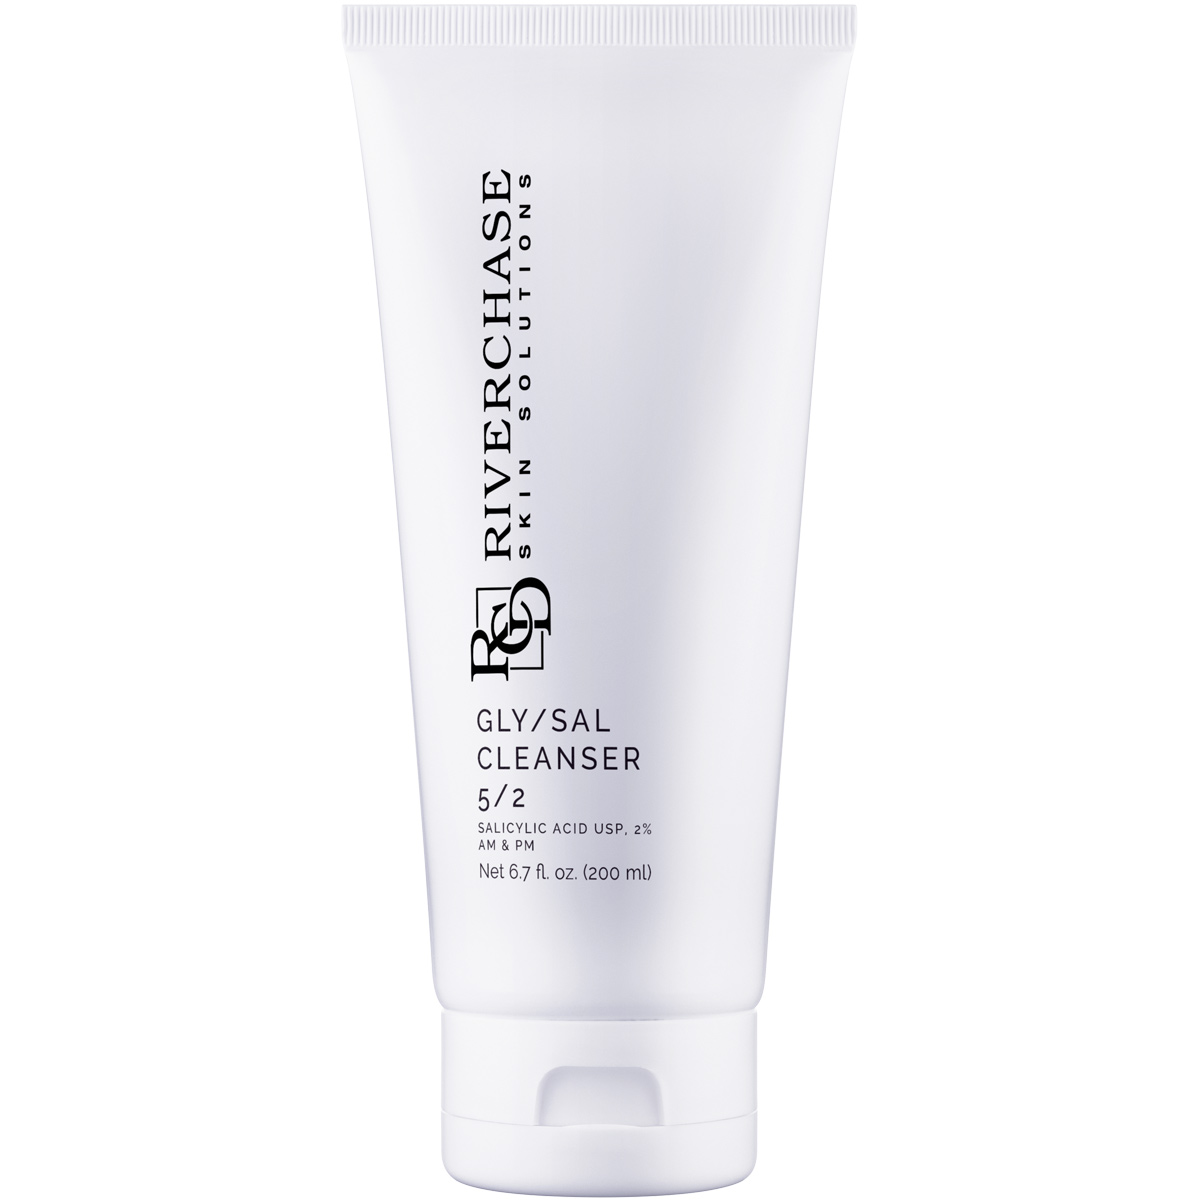 Gly/Sal Cleanser 5/2